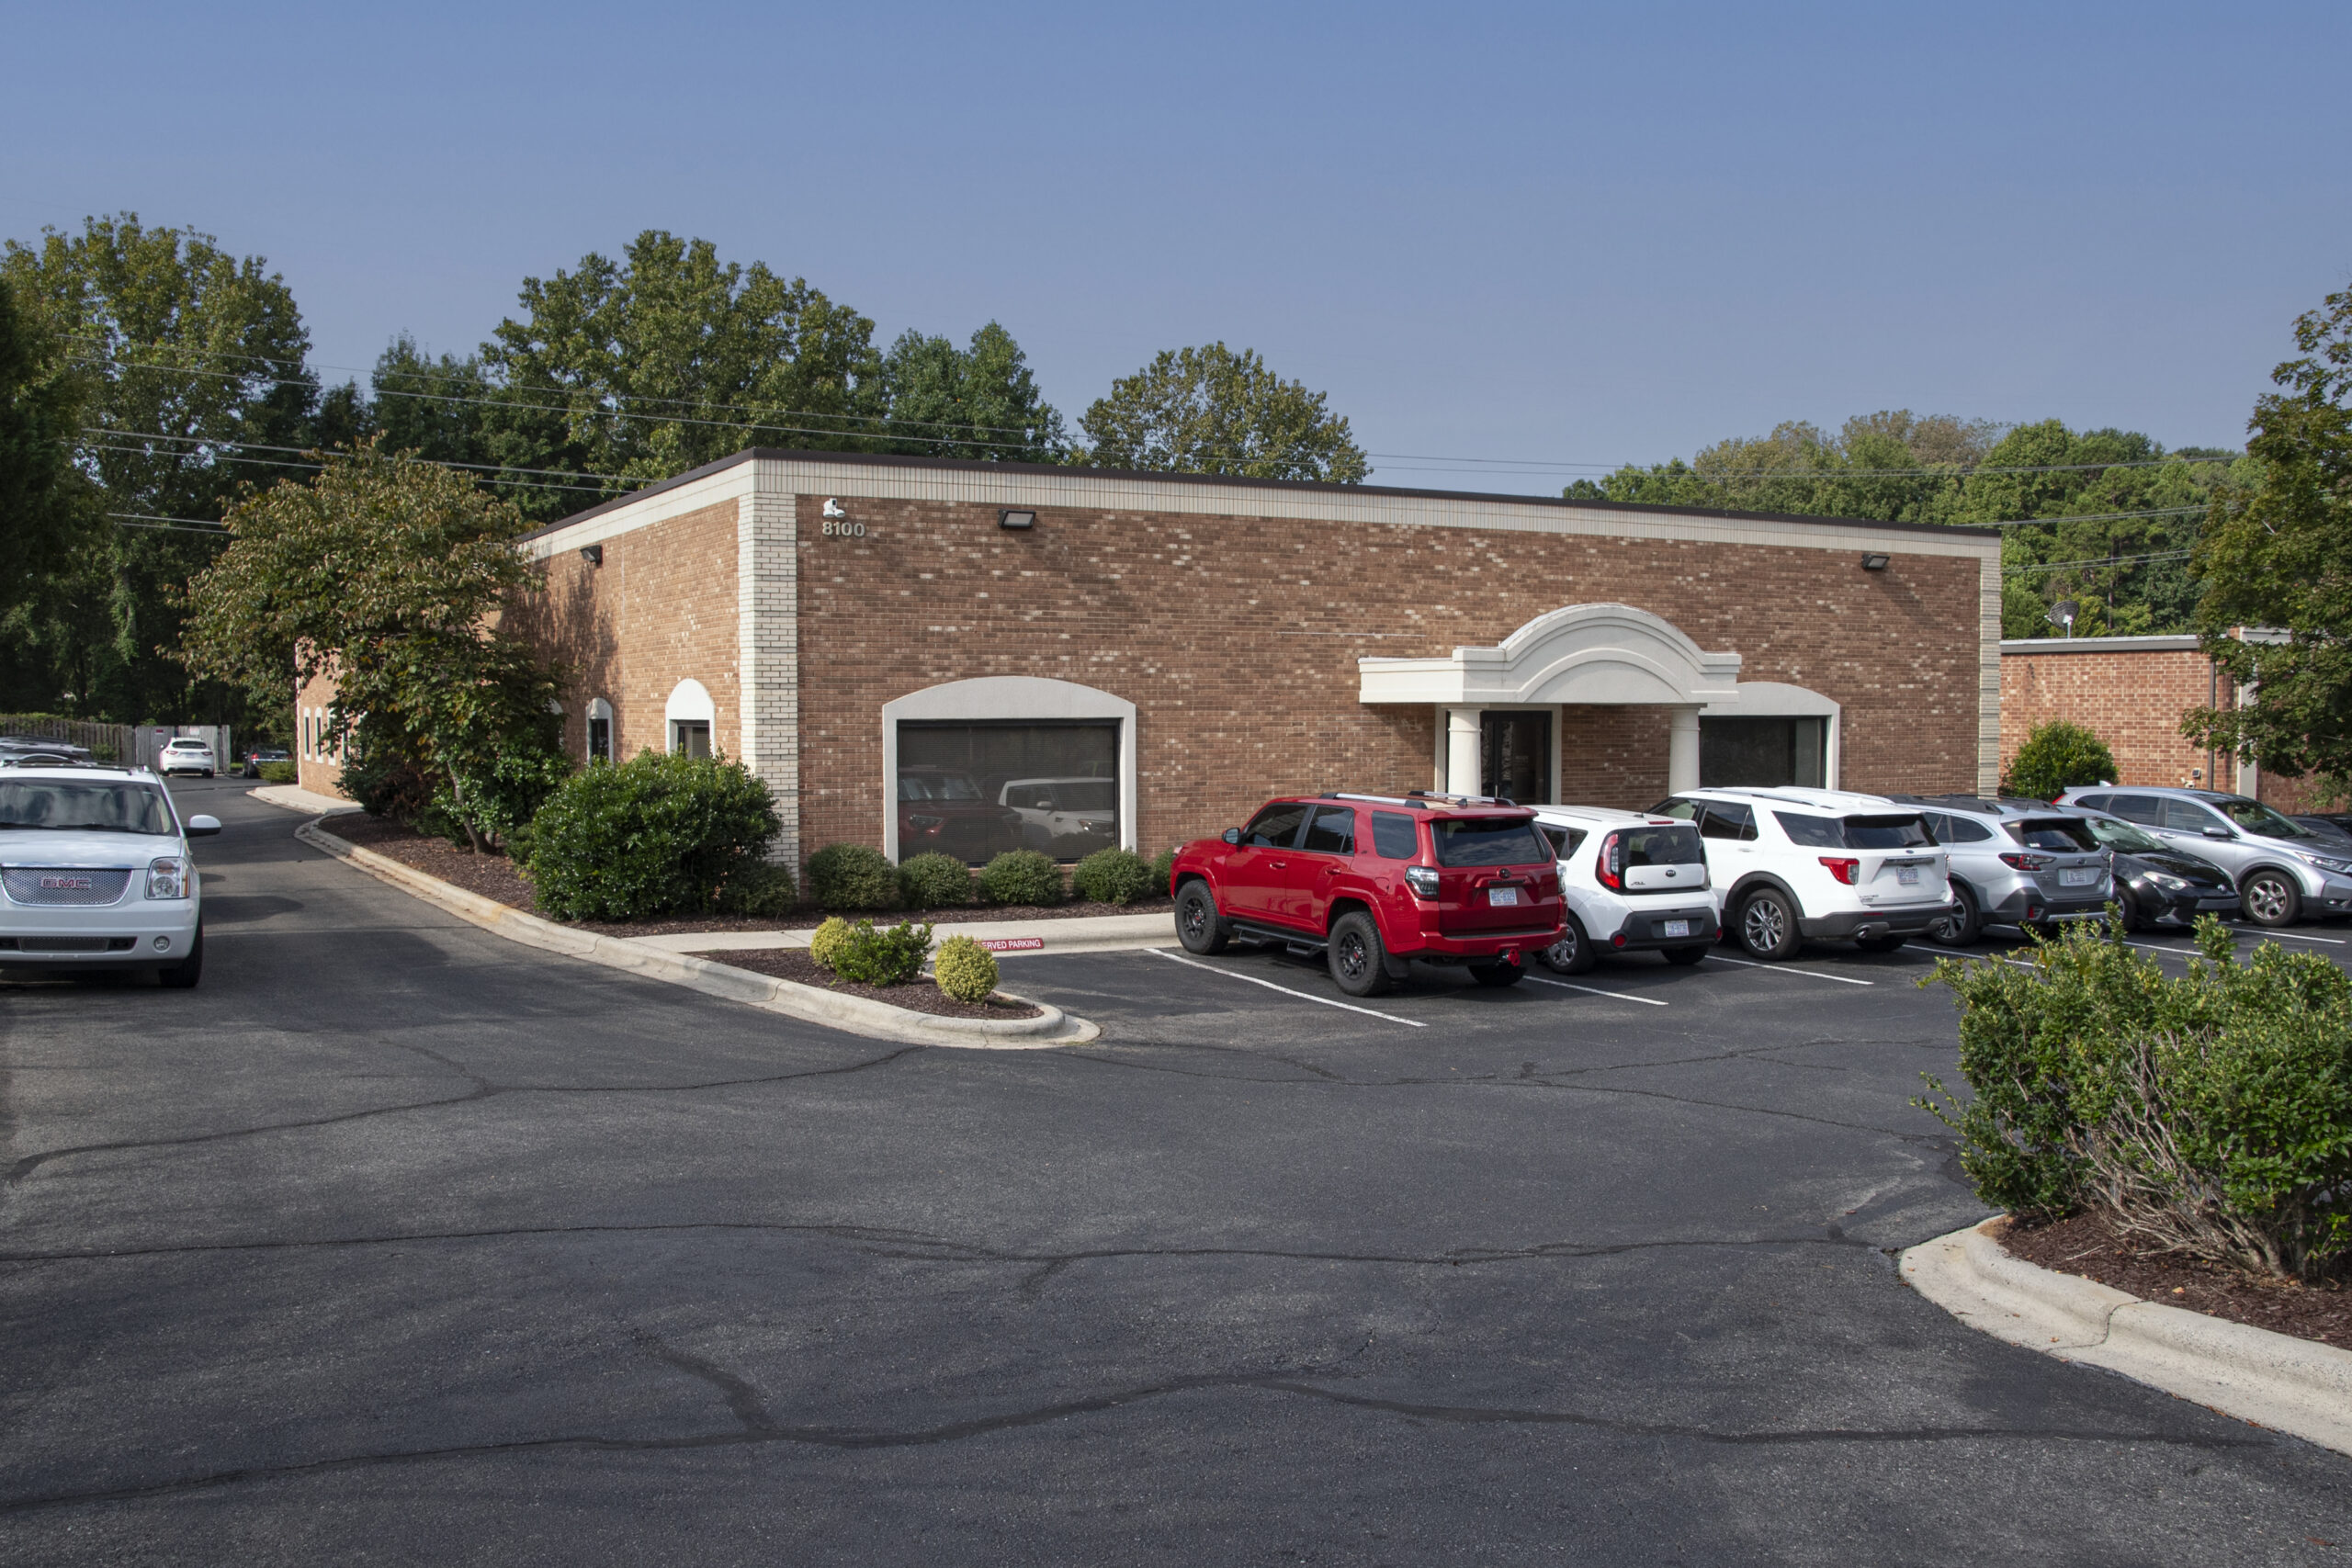 Exterior of Brick Office Building with cars in front